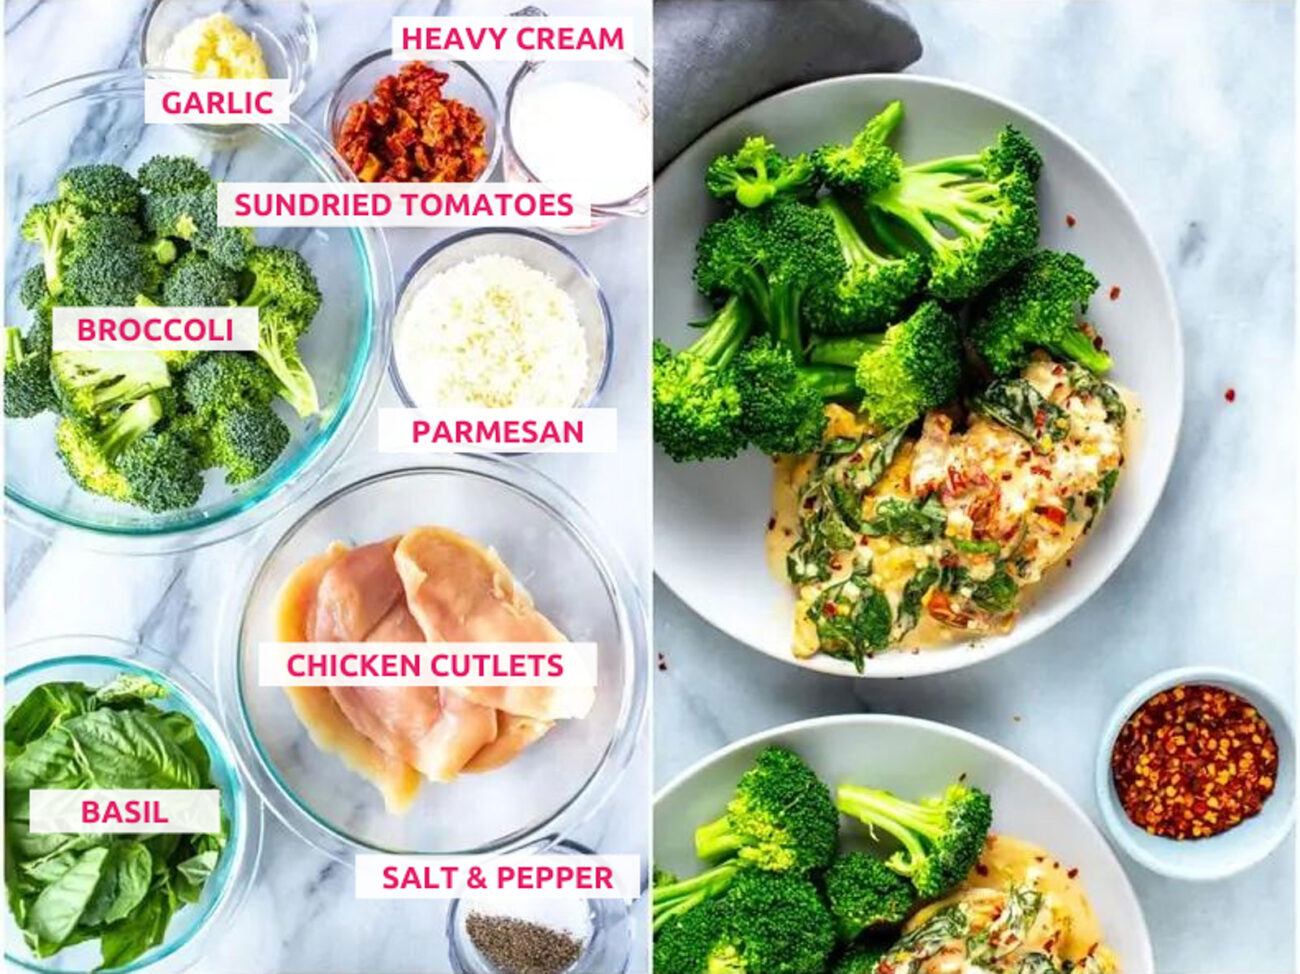 Ingredients for creamy basil chicken skillet: chicken cutlets, broccoli, basil, spinach, garlic, parmesan, sundried tomatoes, heavy cream, salt and pepper.